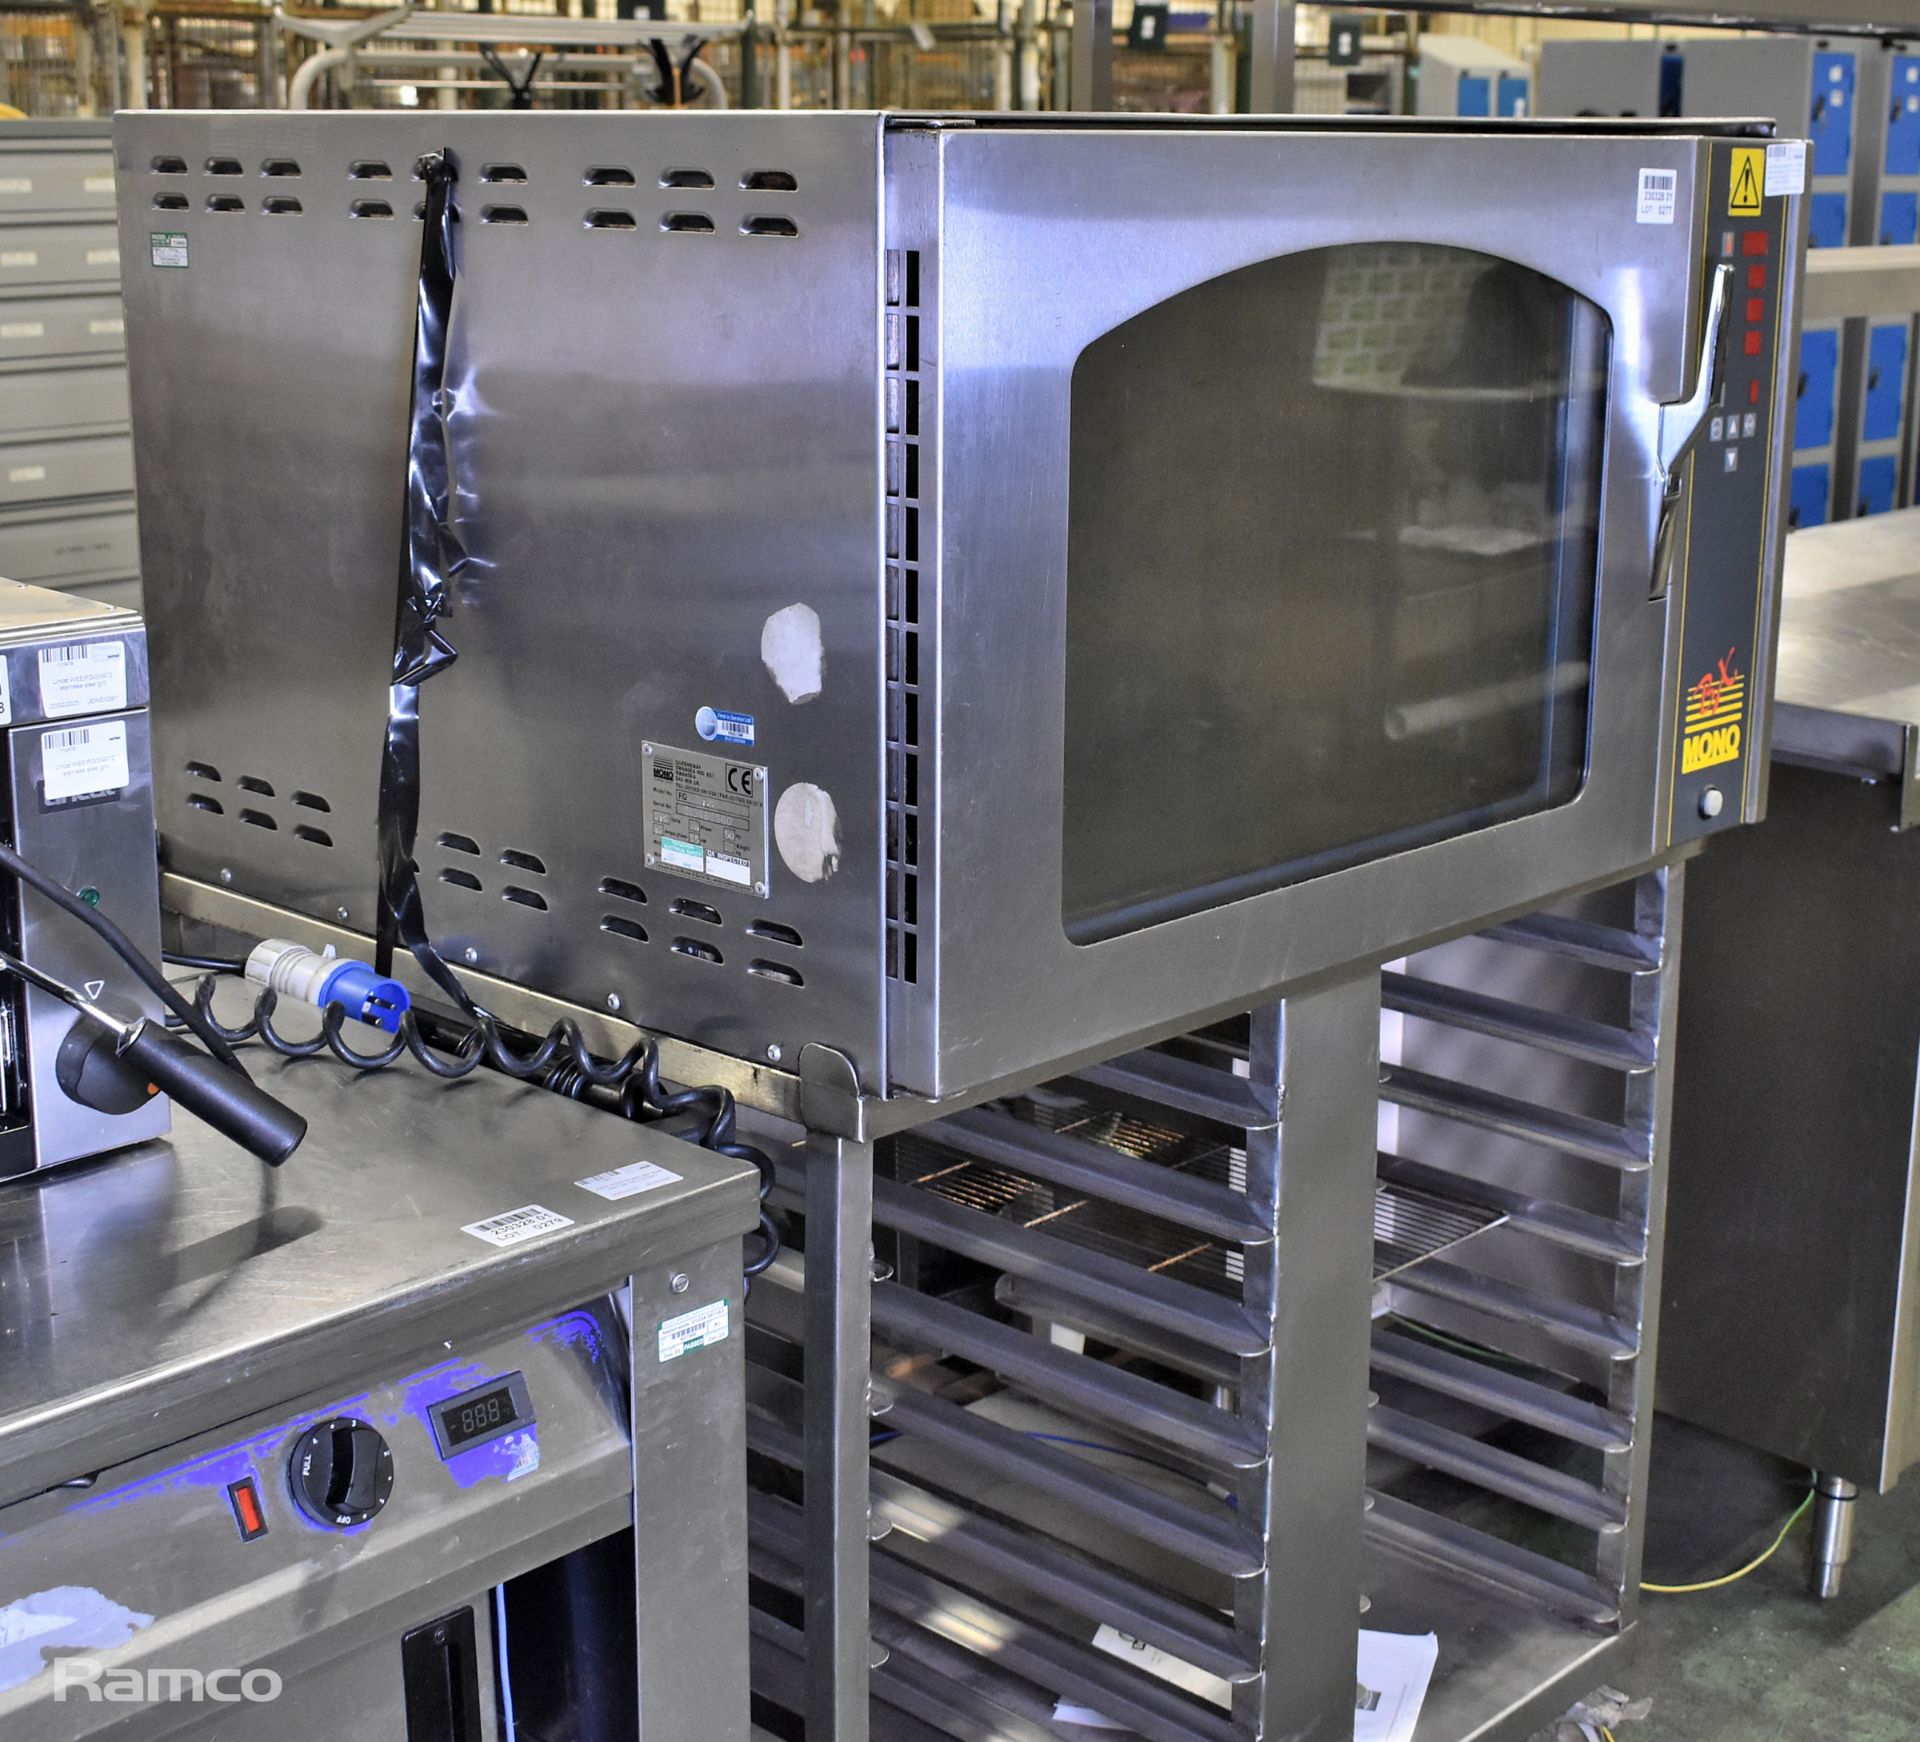 Mono BX equipment FG 15B Oven with stand, 415V 50Hz - Serial No 010460360 - L100 x W87 x H150cm - Image 6 of 7